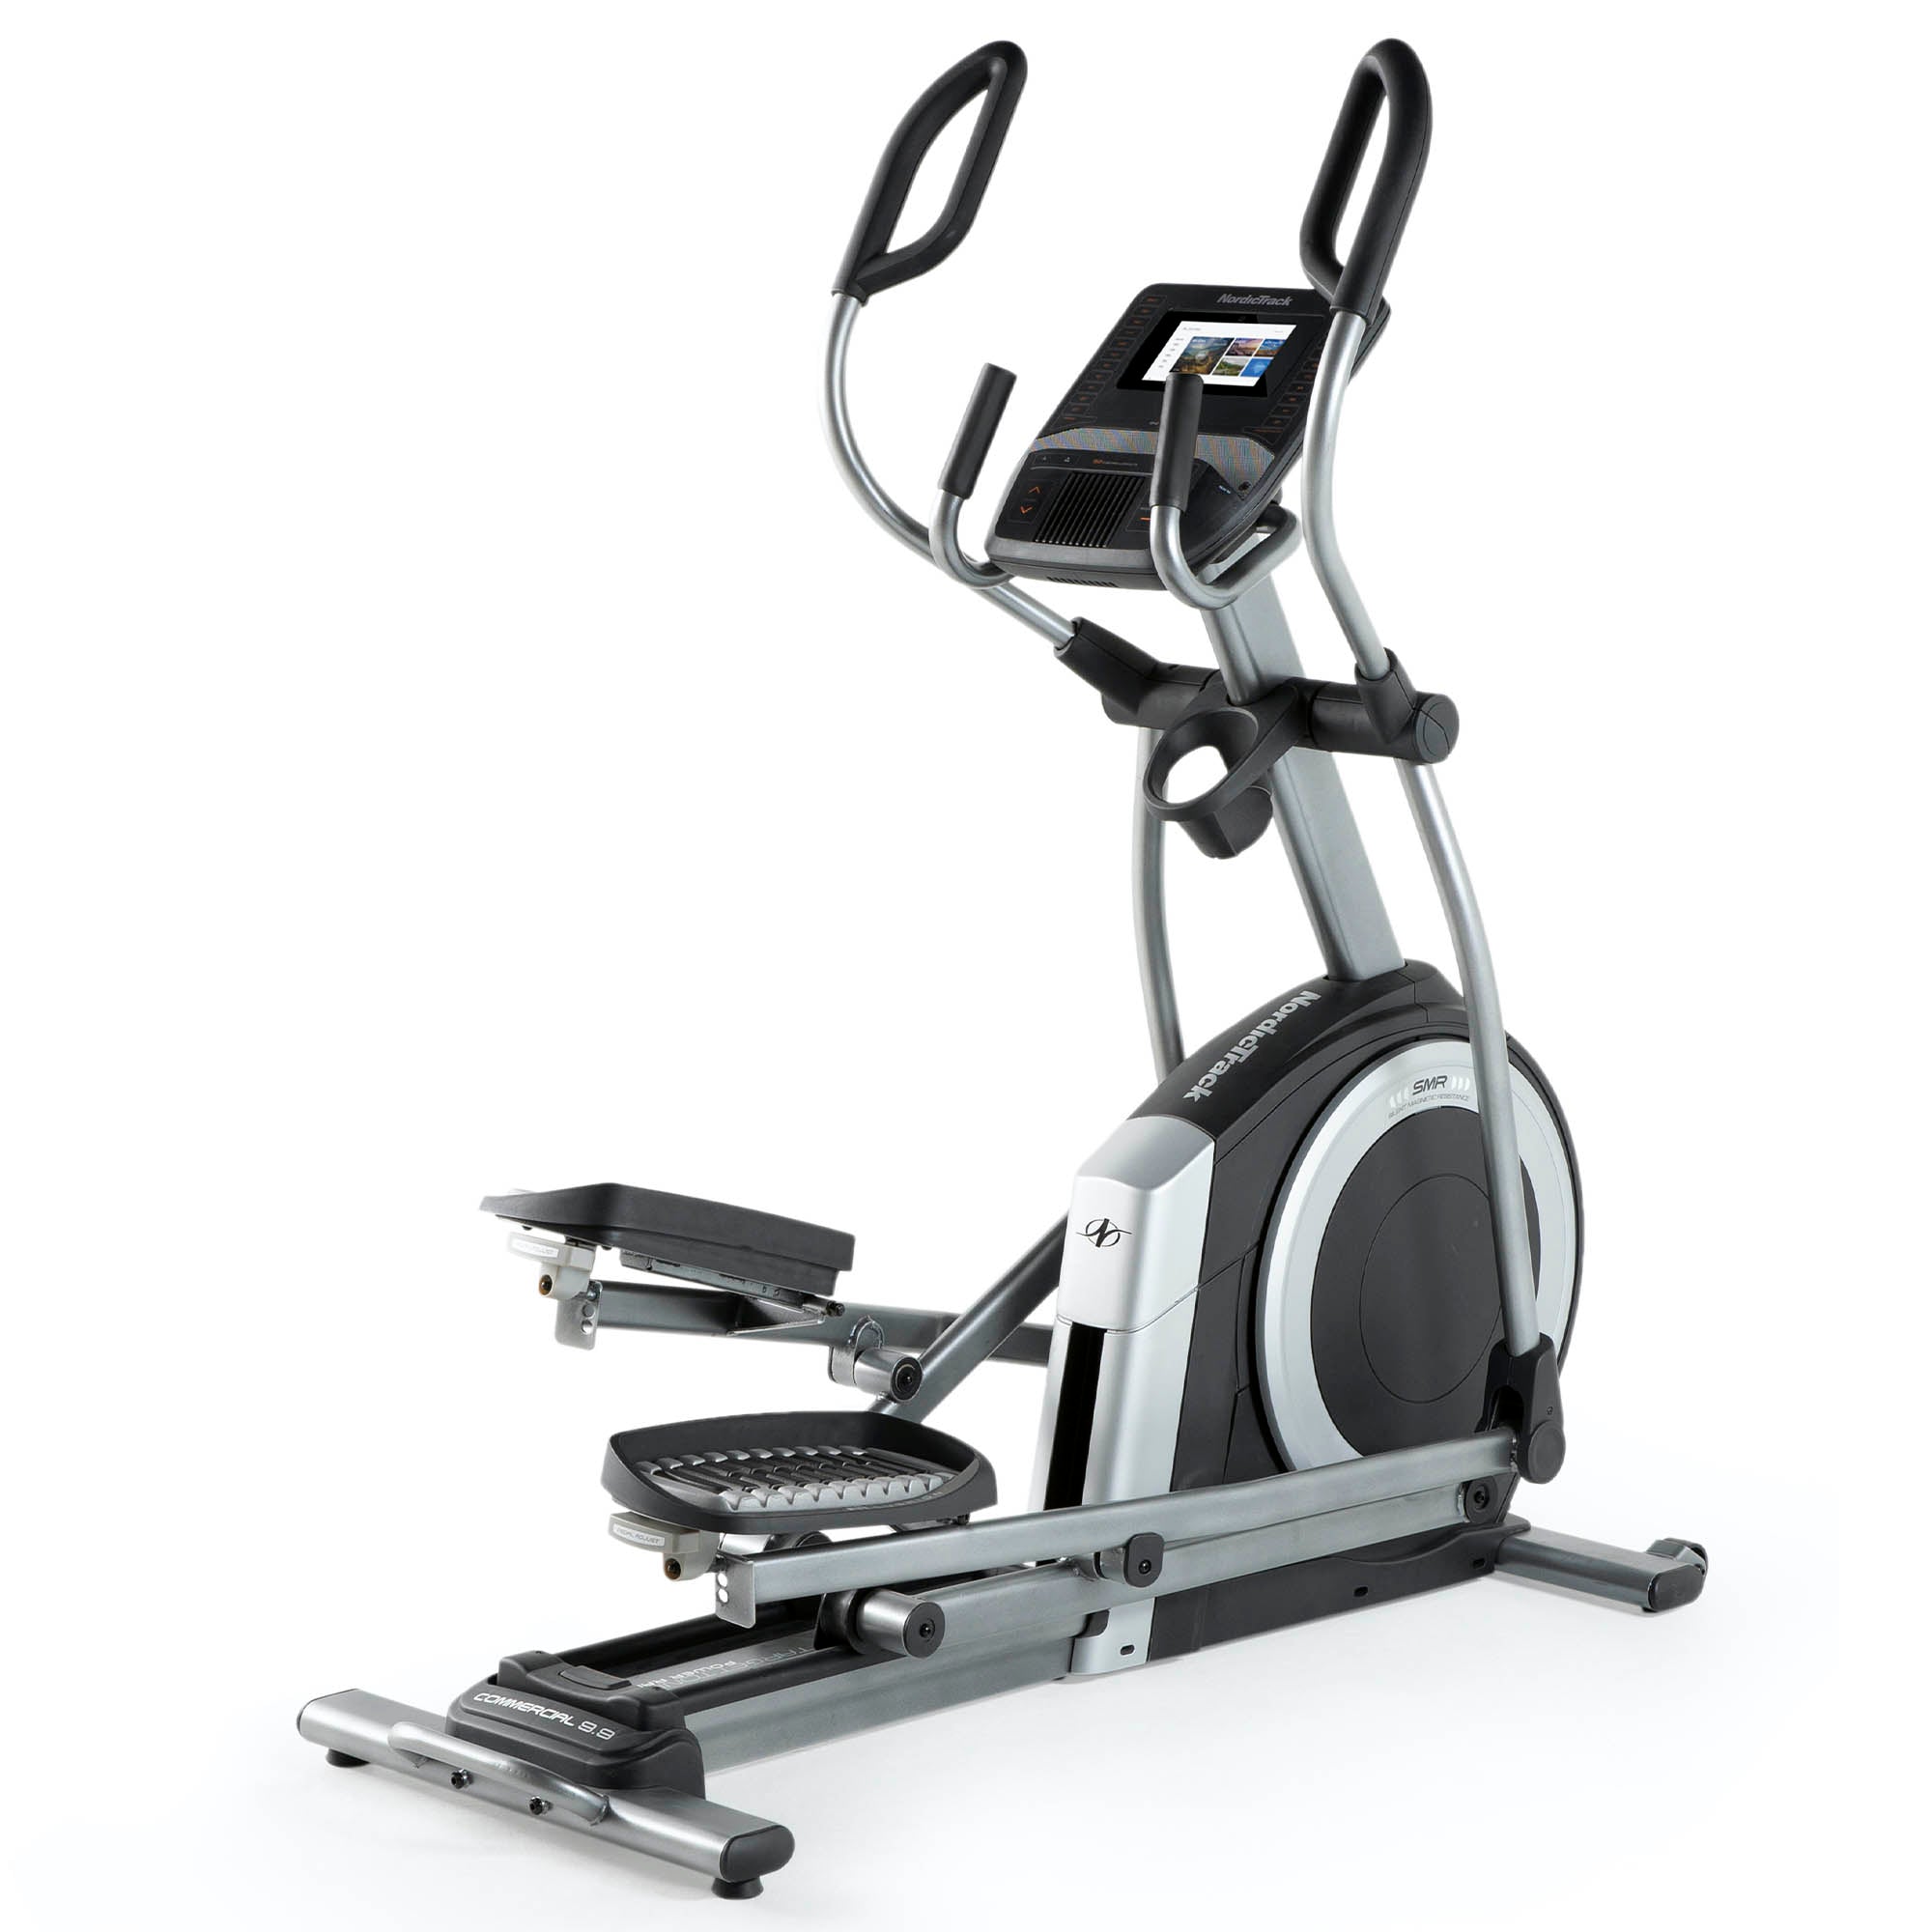 Image of NordicTrack Commercial 9.9 Elliptical Cross Trainer